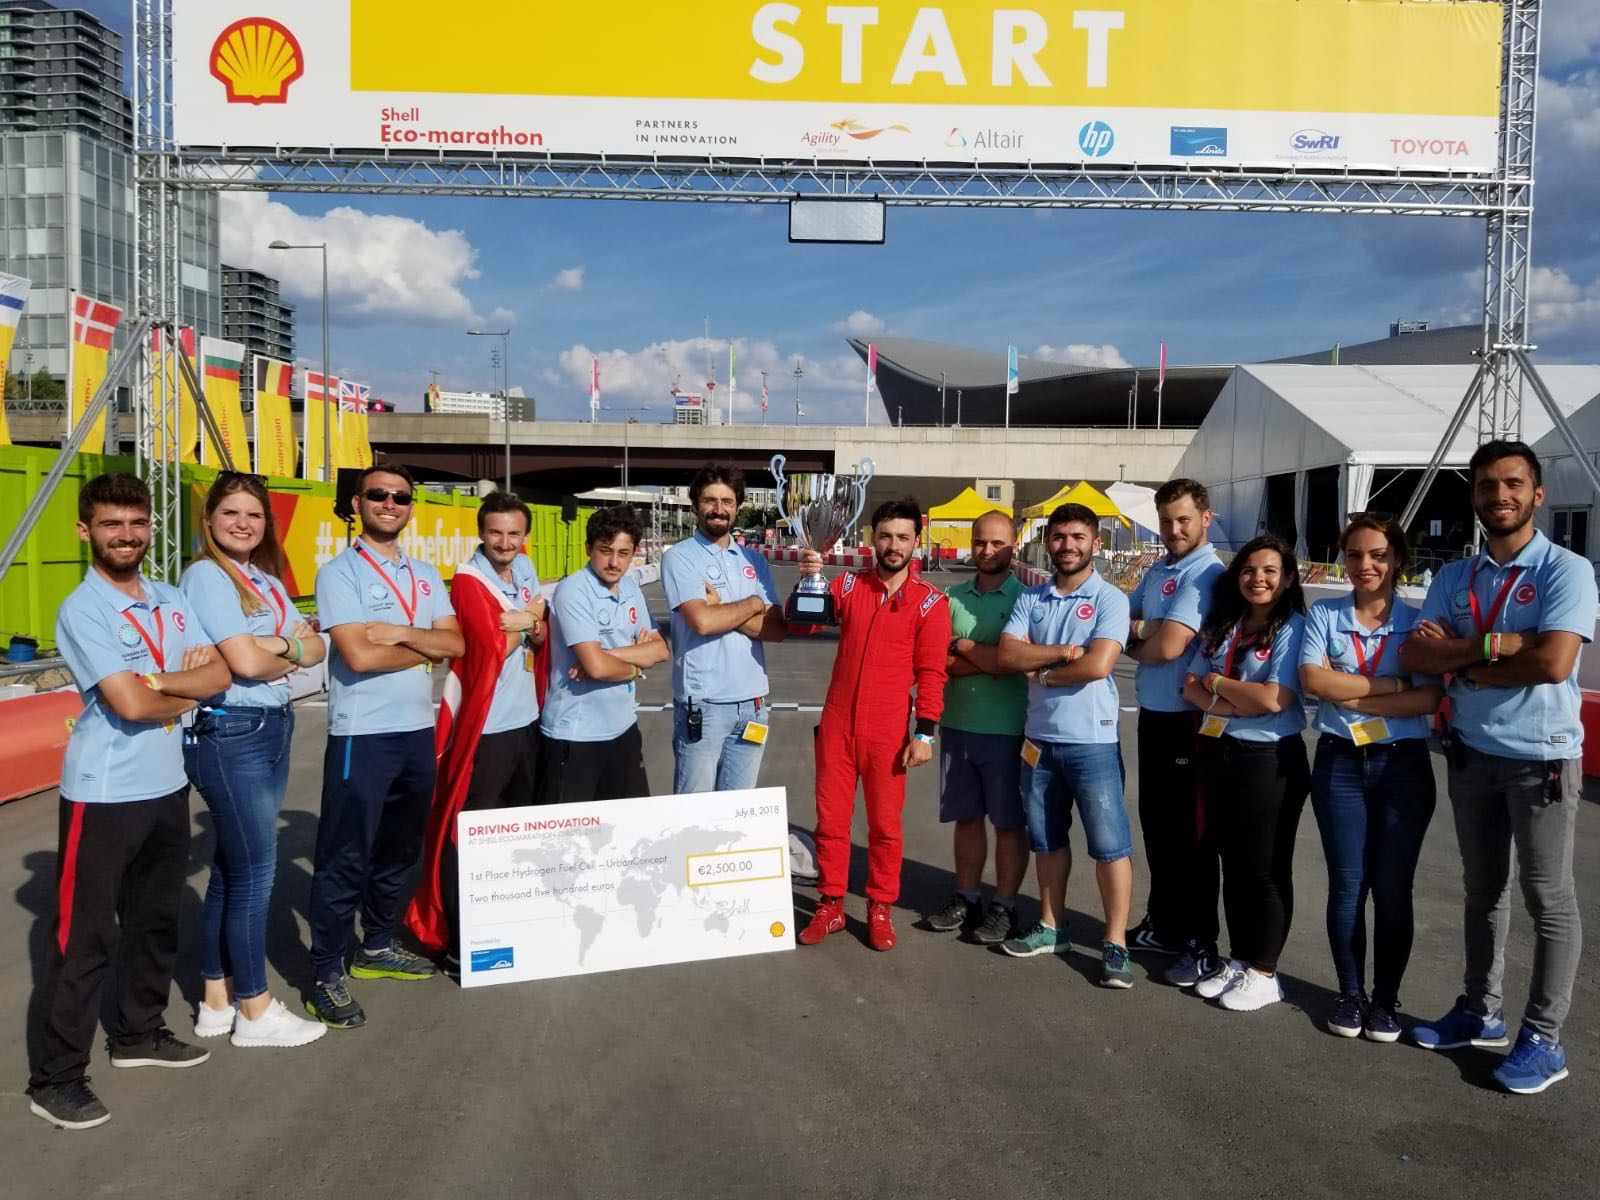 <div>UMAKİT, is developing hydrogen-powered cars.İt has participated and beig  part in competitions in international level in recent years representing Turkey.<br />
<br />
Shell Eco-Marathon Europe, based on the longest distance to travel with the least energy, was held in London in July. Turkey team who win the European championship competing with 11 competitors in their field made history as the first Turkish team. İnternal hydrogen powered vehicle with 1 cubic meter of hydrogen gas showed the success of 182.6 kilometers and became the most efficient vehicle.</div>

<div><br />
About a year, 13-students of UMAKİT  team who work with intense tempo  for the tools of the vehicle named Barbarossa,and it woth the effort.</div>

<div><br />
UMAKIT in Istanbul; Shell Eco-Marathon which will be held in Kocaeli  Turkey by TÜBİTAKi Efficiency Challenge races will be attended by energy-efficient vehicles. </div>